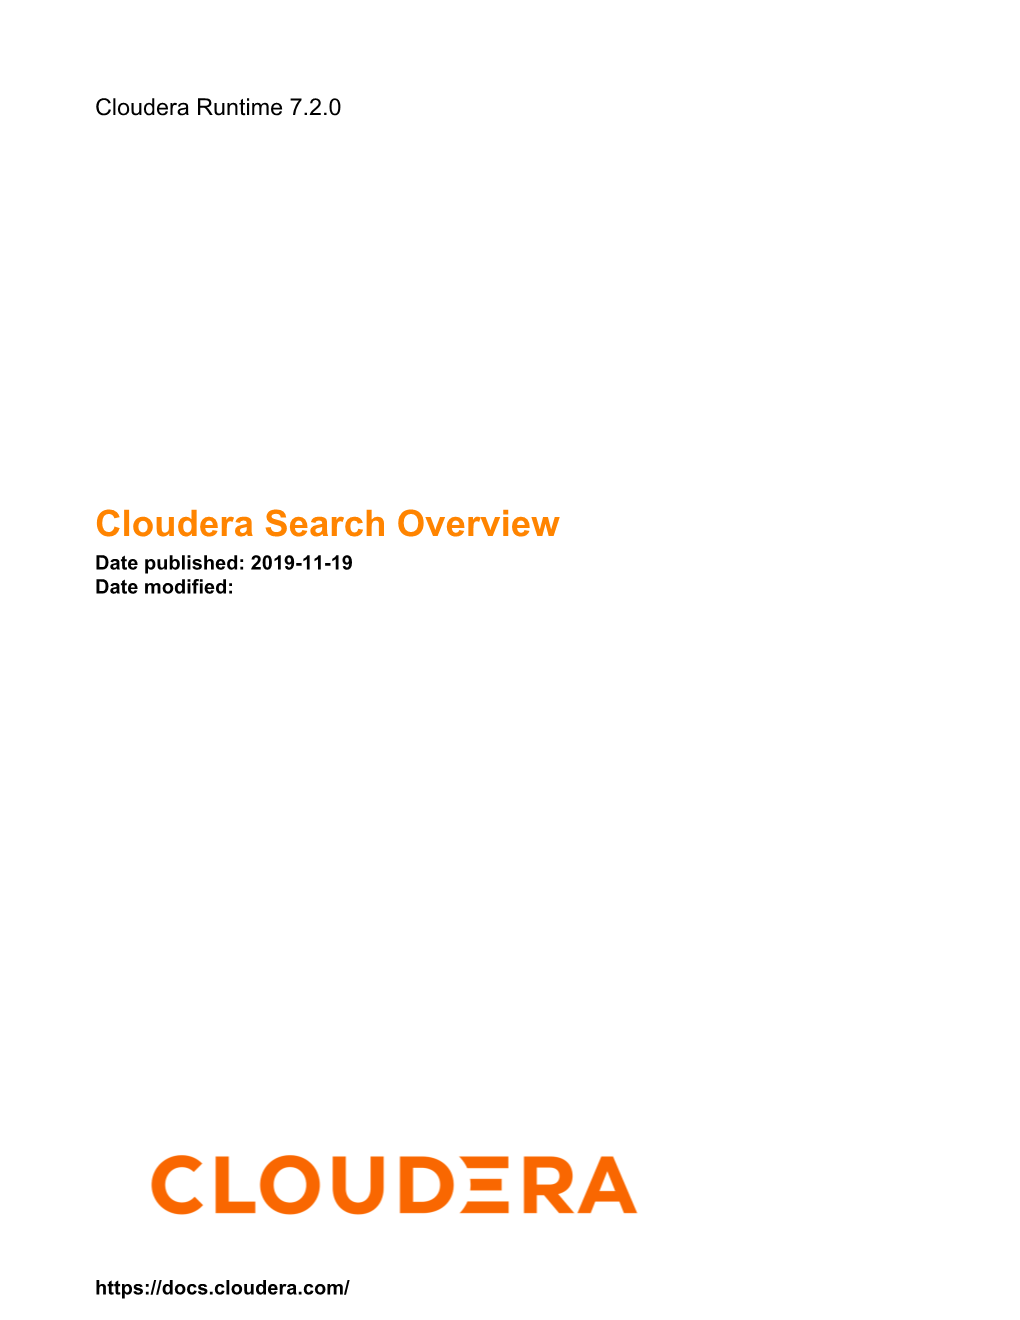 Cloudera Search Overview Date Published: 2019-11-19 Date Modified